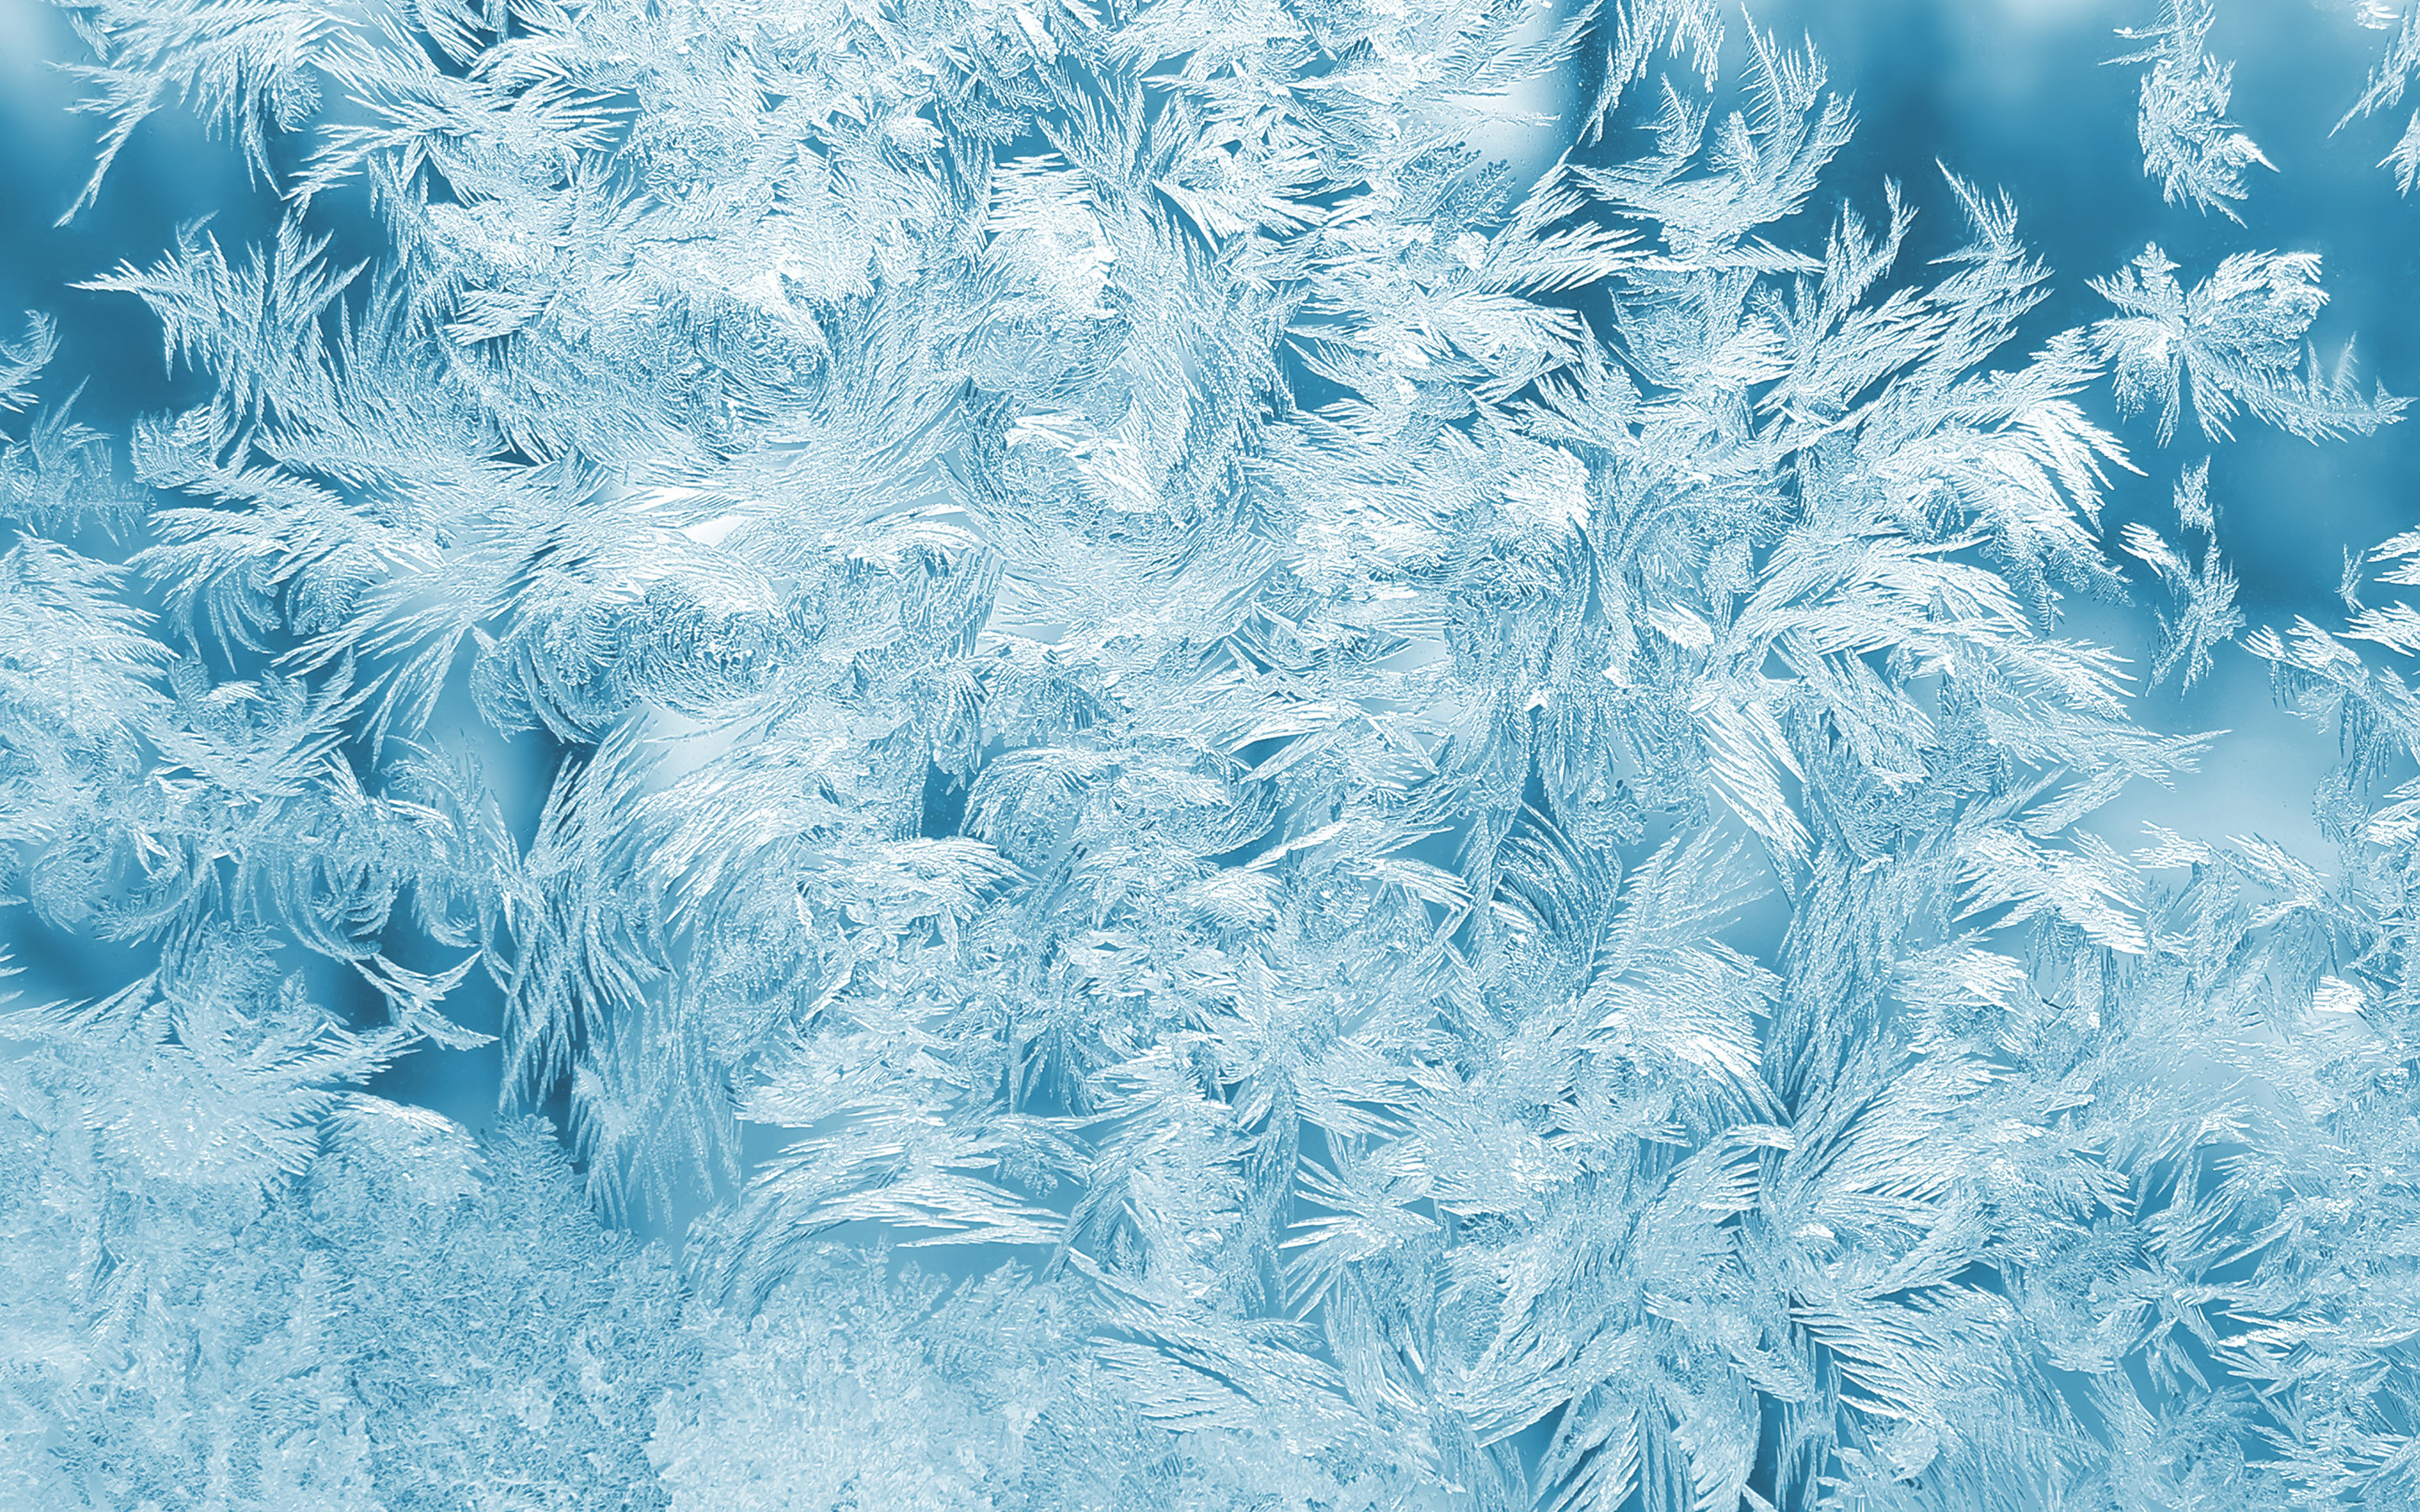 Download wallpaper blue ice texture, 4k, macro, blue ice background, ice, frozen water textures, blue ice, ice textures for desktop with resolution 2880x1800. High Quality HD picture wallpaper